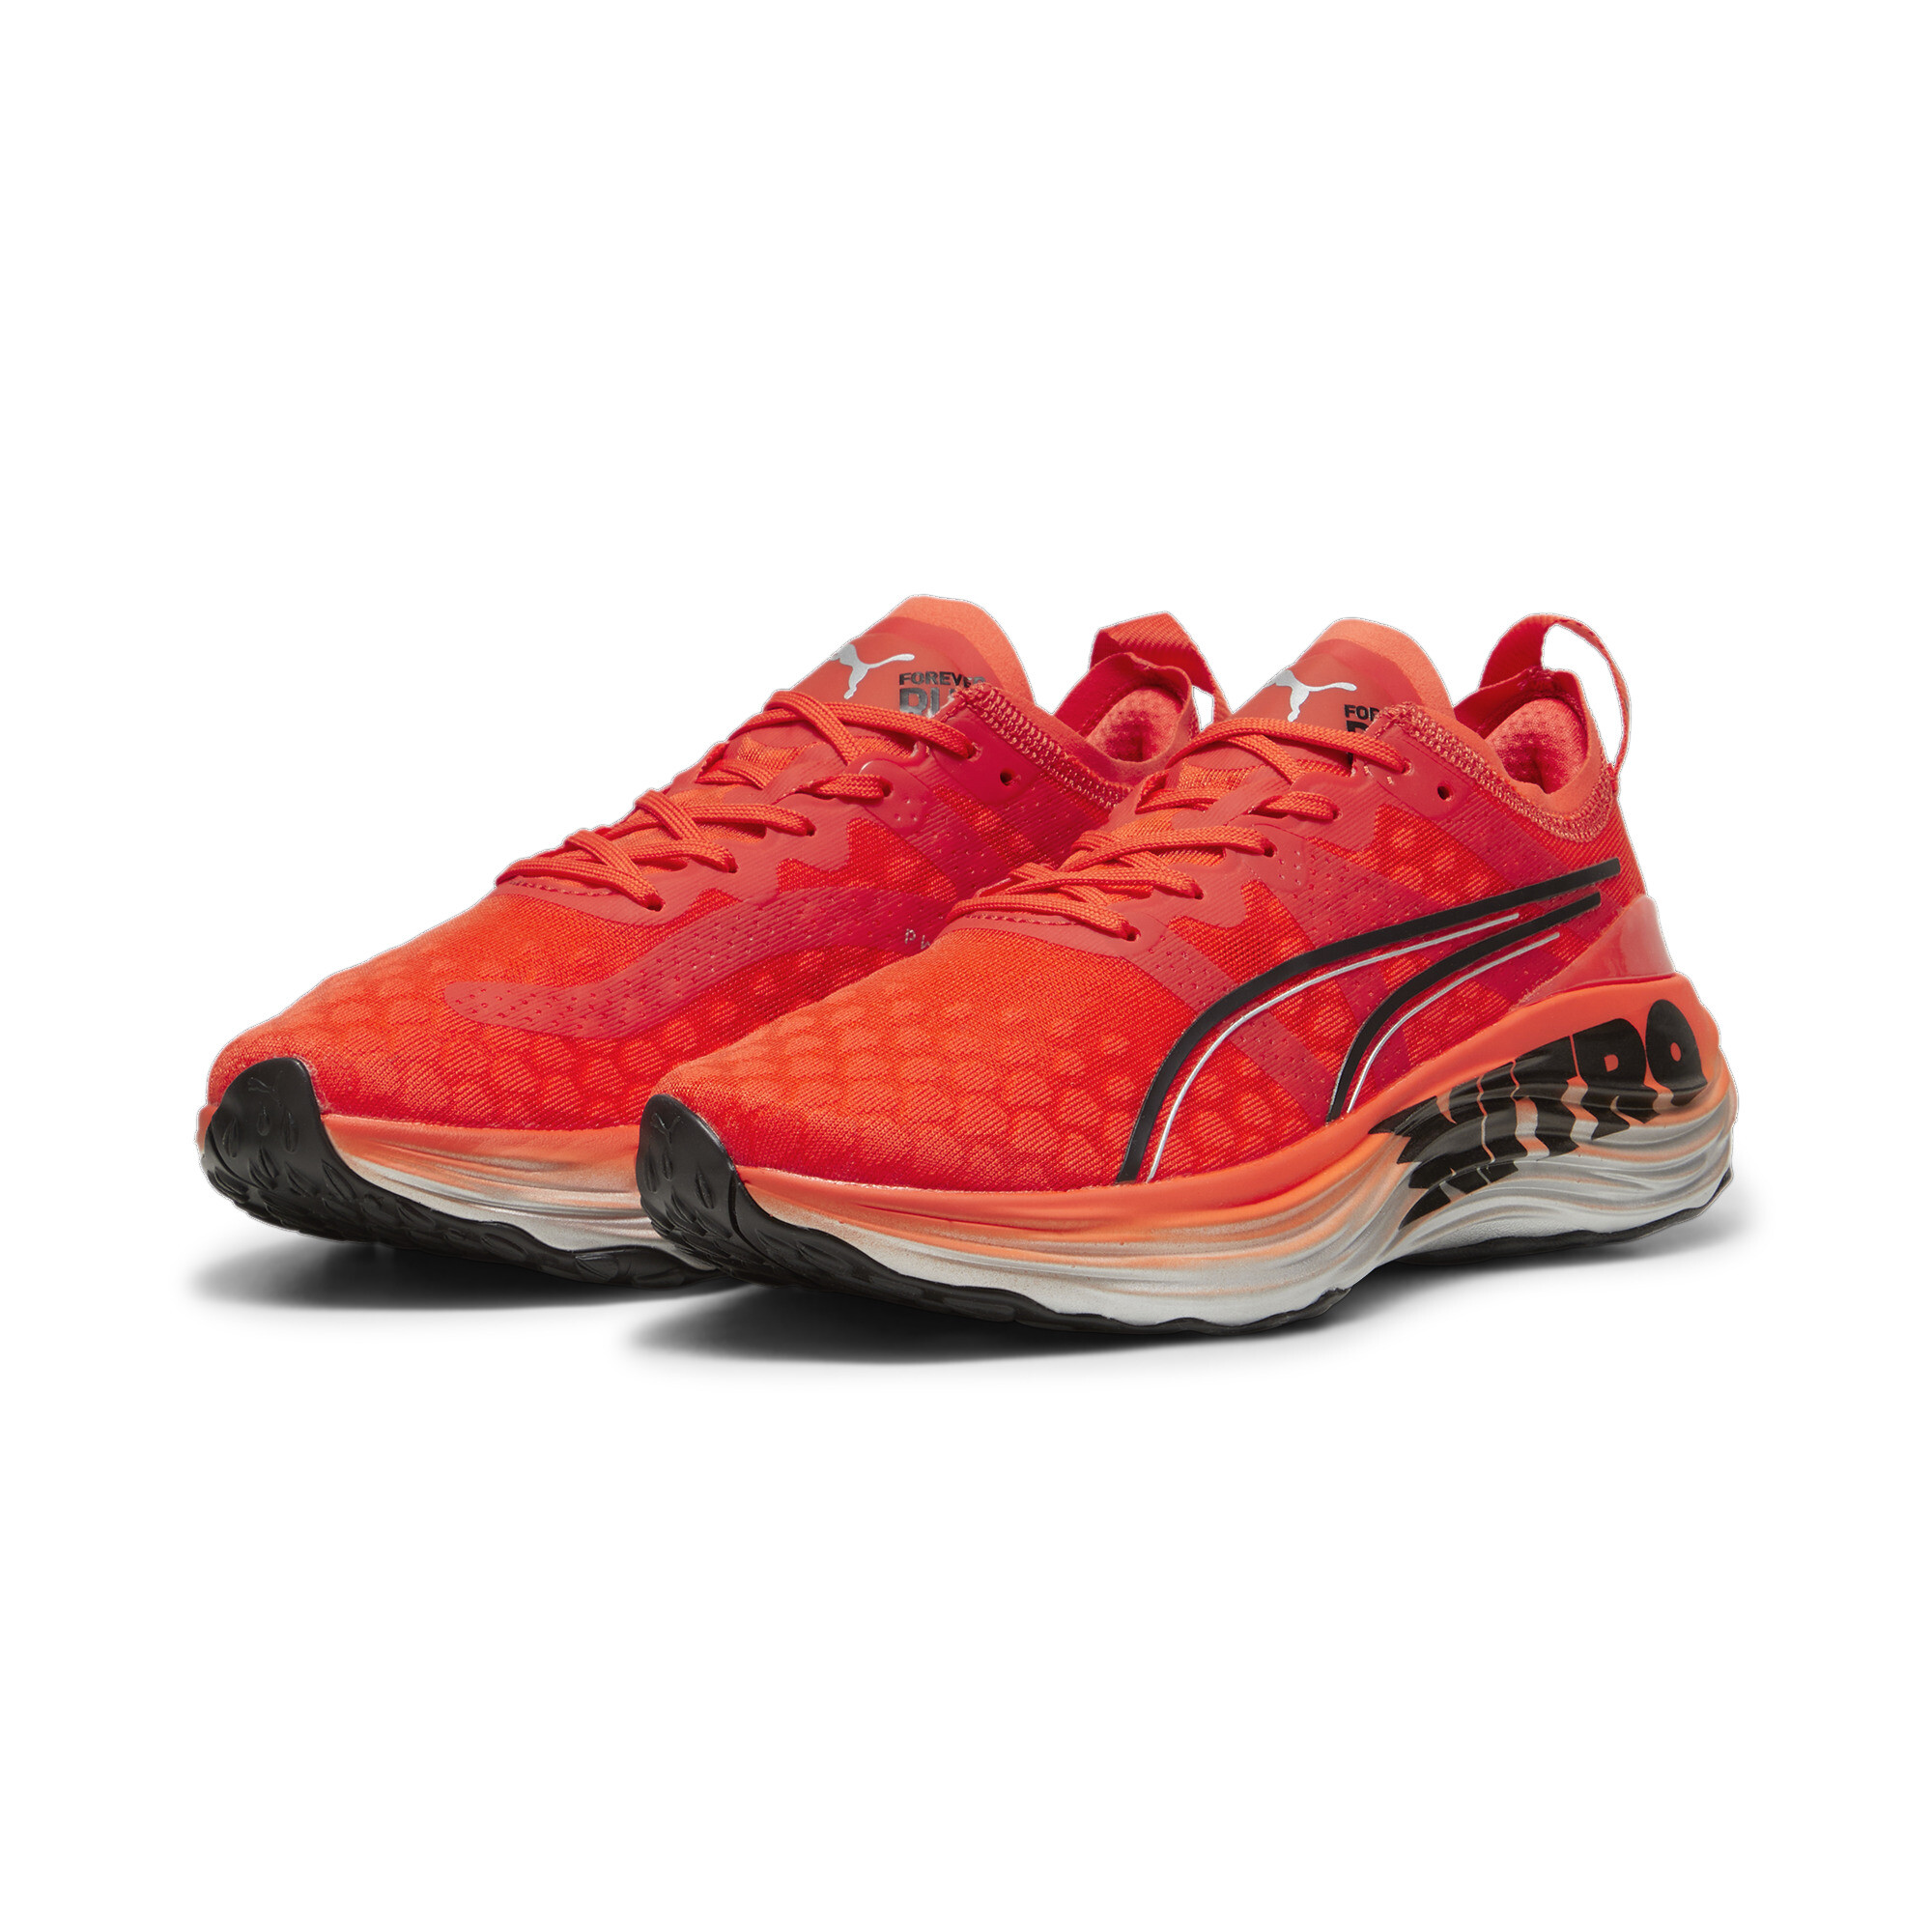 Women's Puma Forever Run NITRO's Running Shoes, Red, Size 39, Shoes